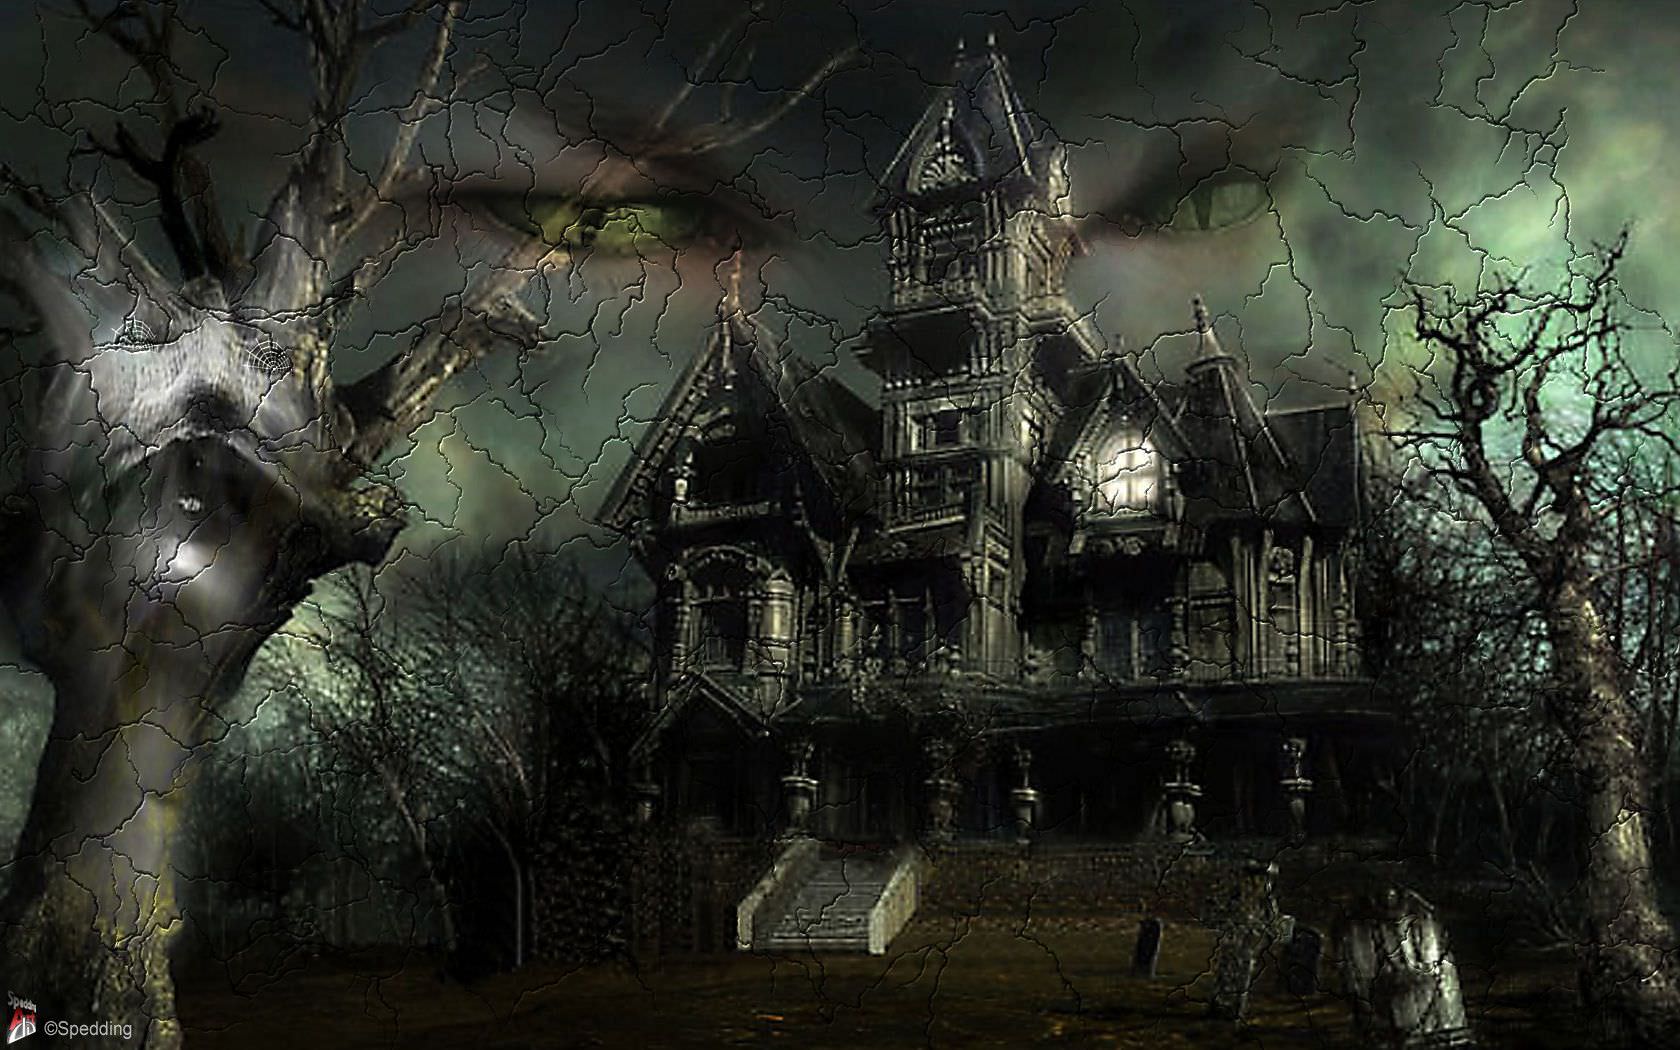 Scary Background Wallpaper Image Pictures